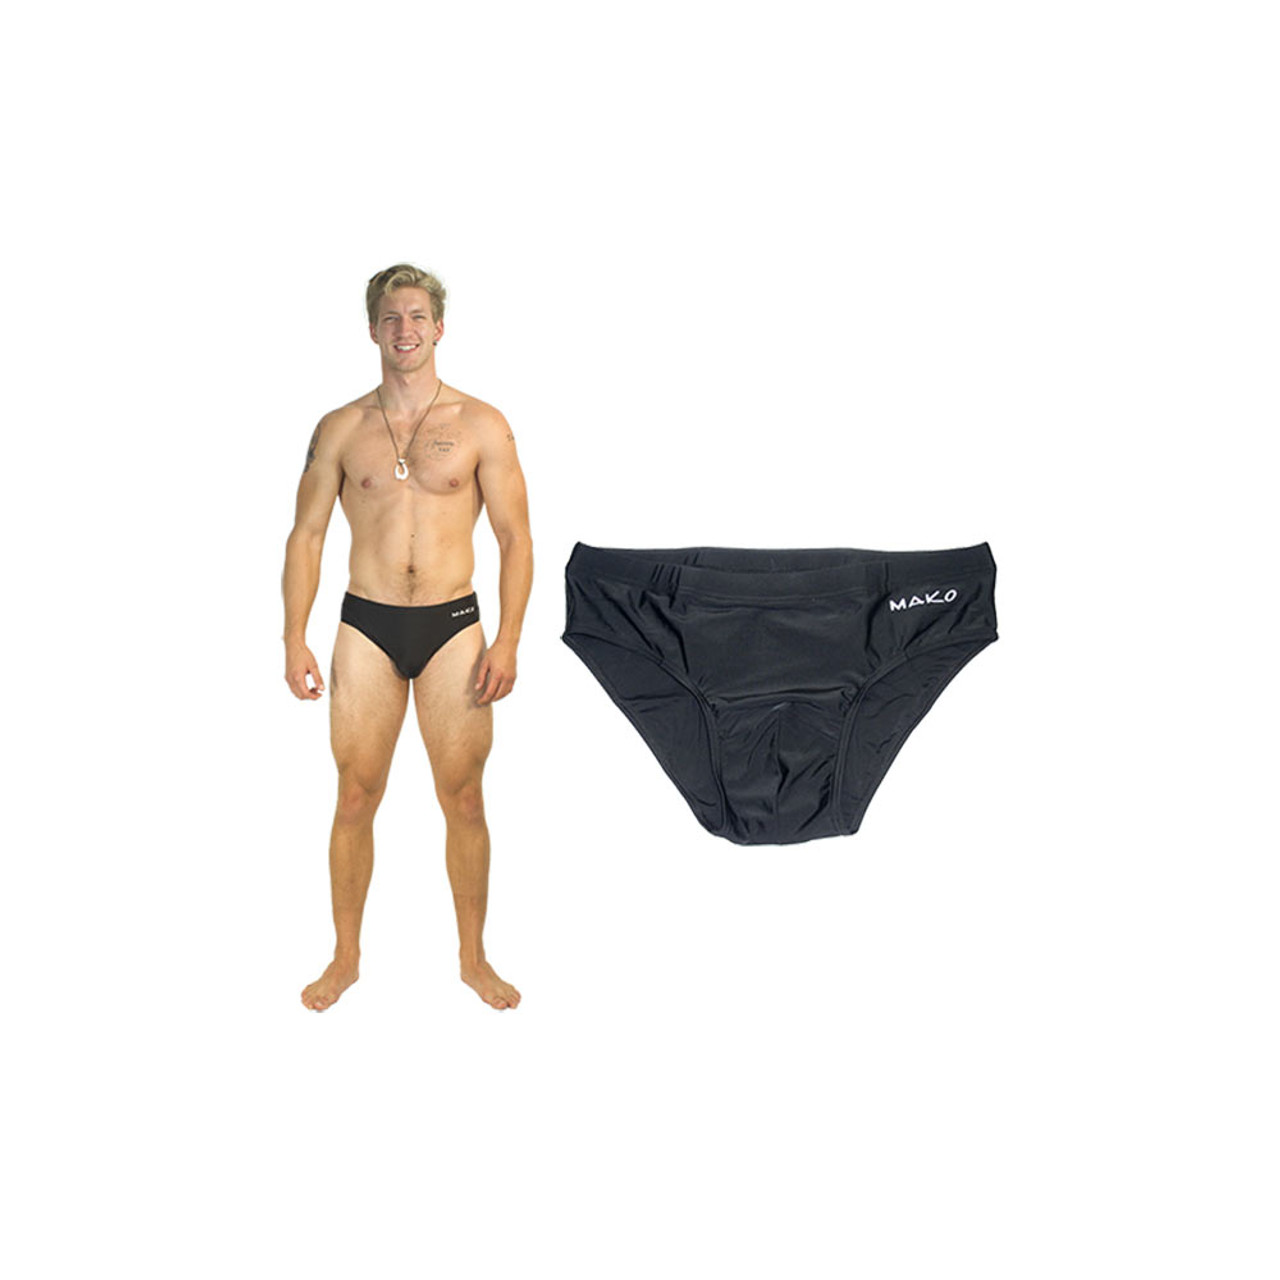 We Asked About Your Big & Tall Underwear and You Told Us This